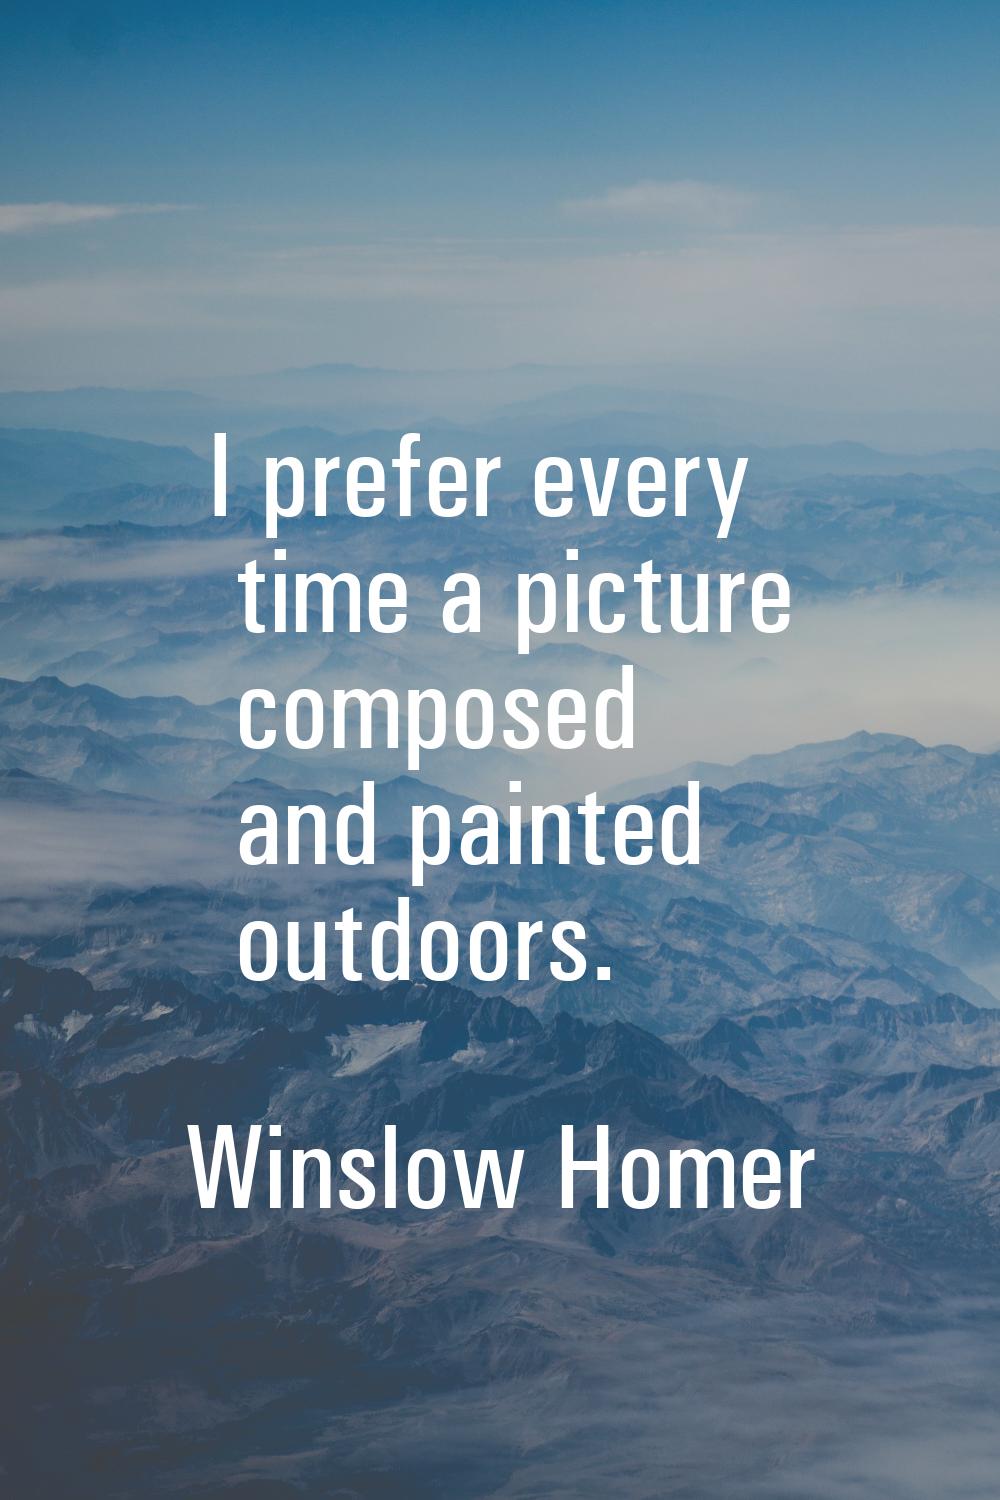 I prefer every time a picture composed and painted outdoors.